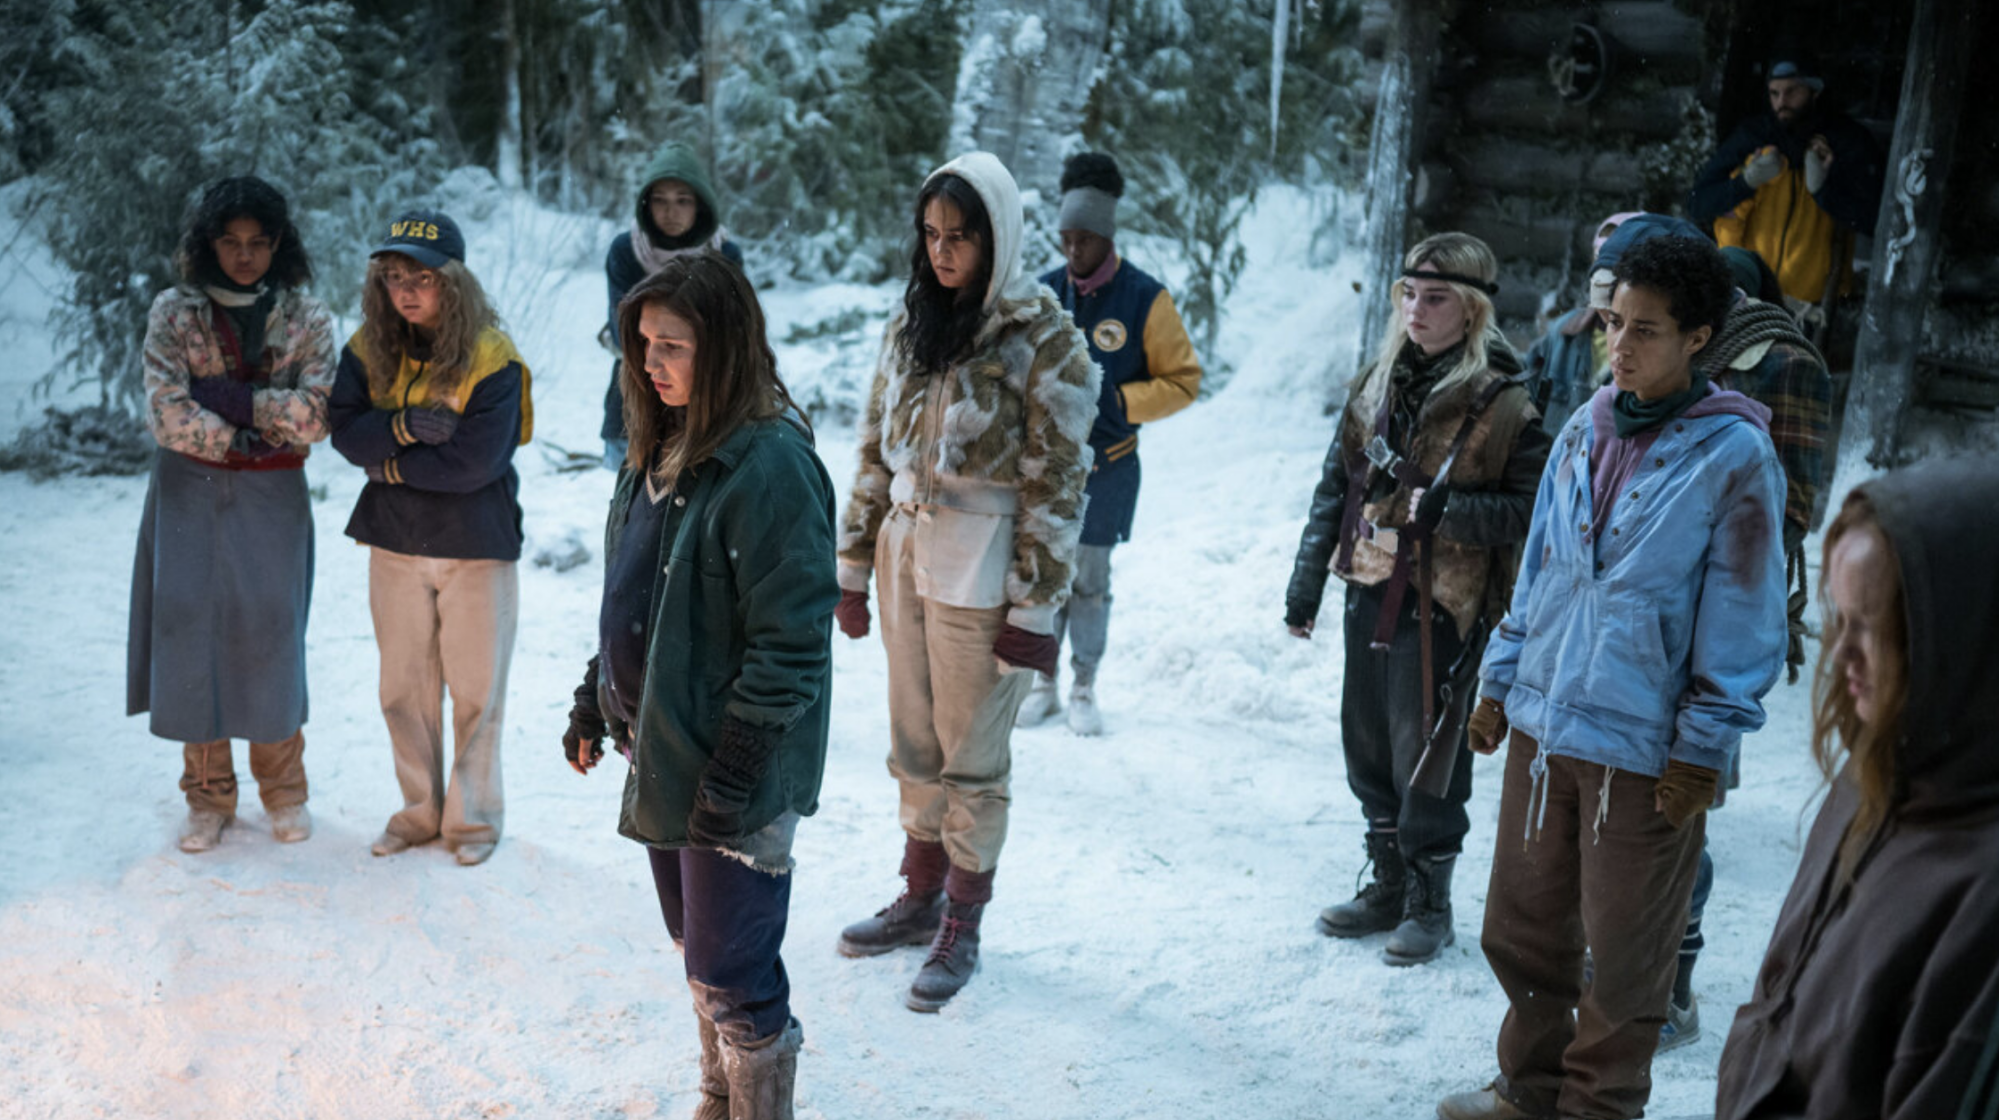 A group of girls stand in the snowy wilderness outside a cabin.